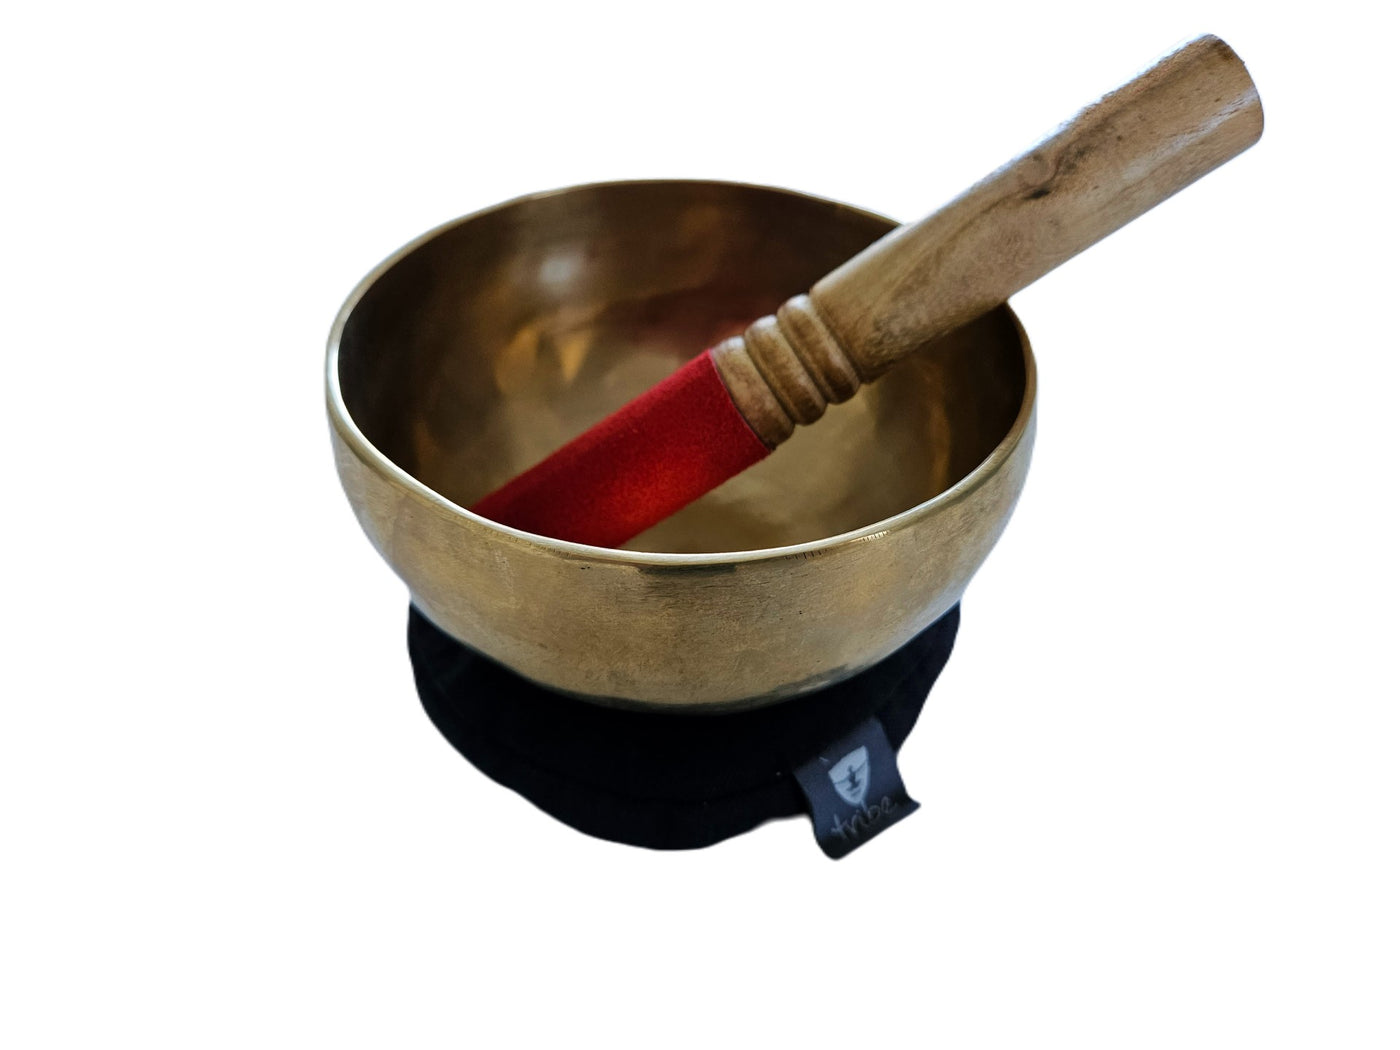 Tibetan Singing Bowl - bowl sitting on cotton pad with wooden striker inside bowl - TRIBE | Eco Yoga Store